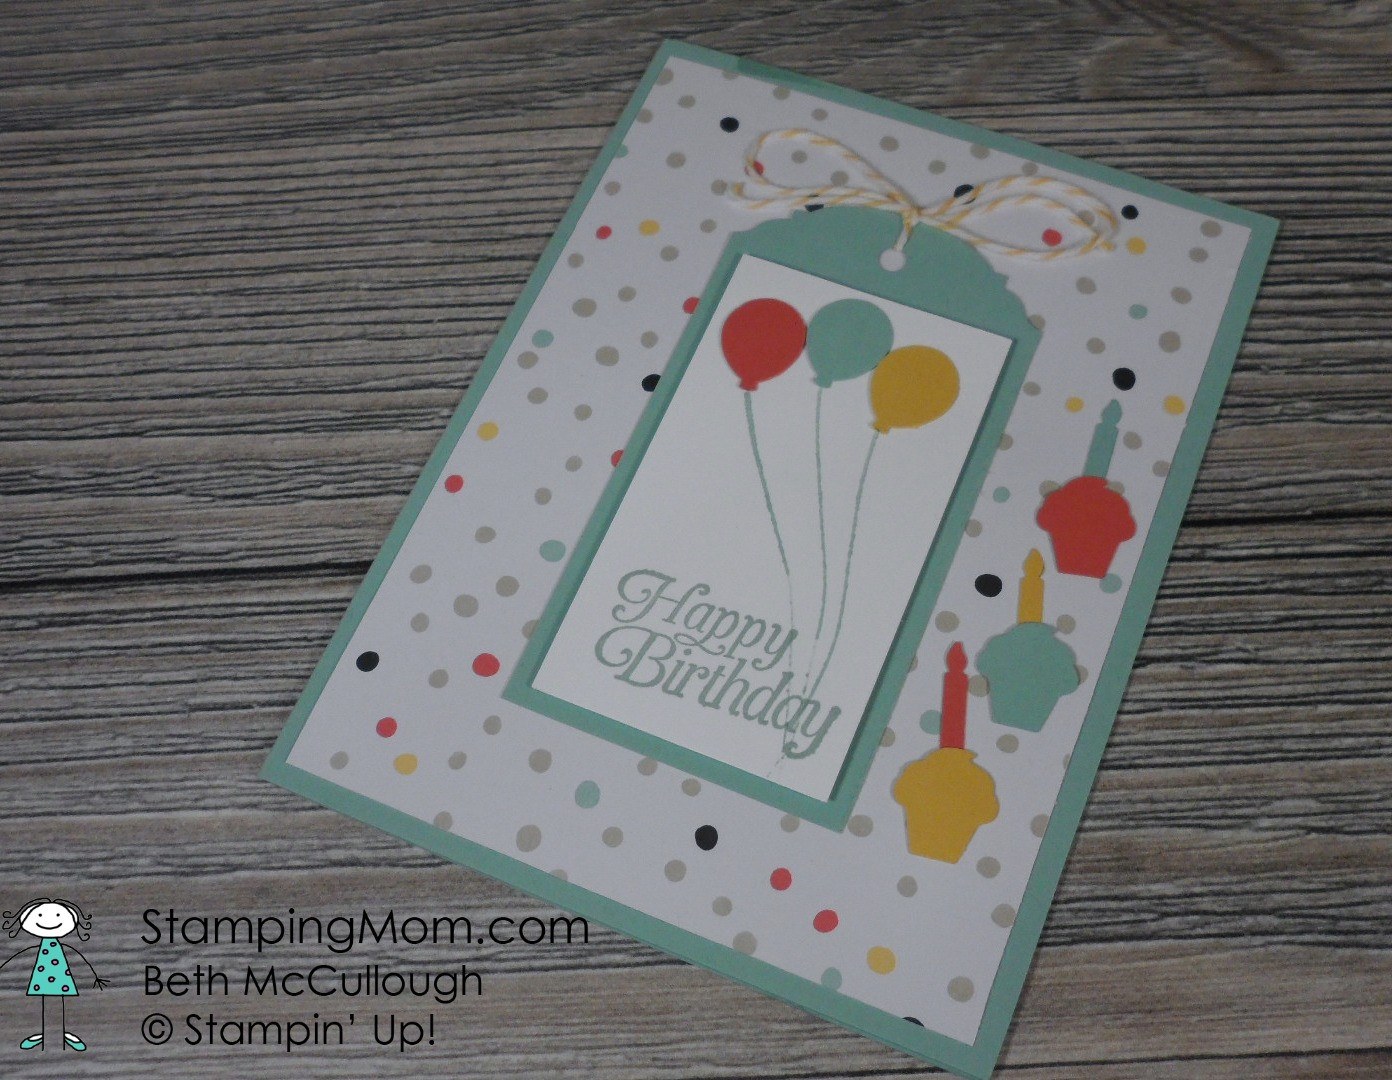 Homemade Birthday Cards For Mom
 My homemade birthday cards – Stamping Mom